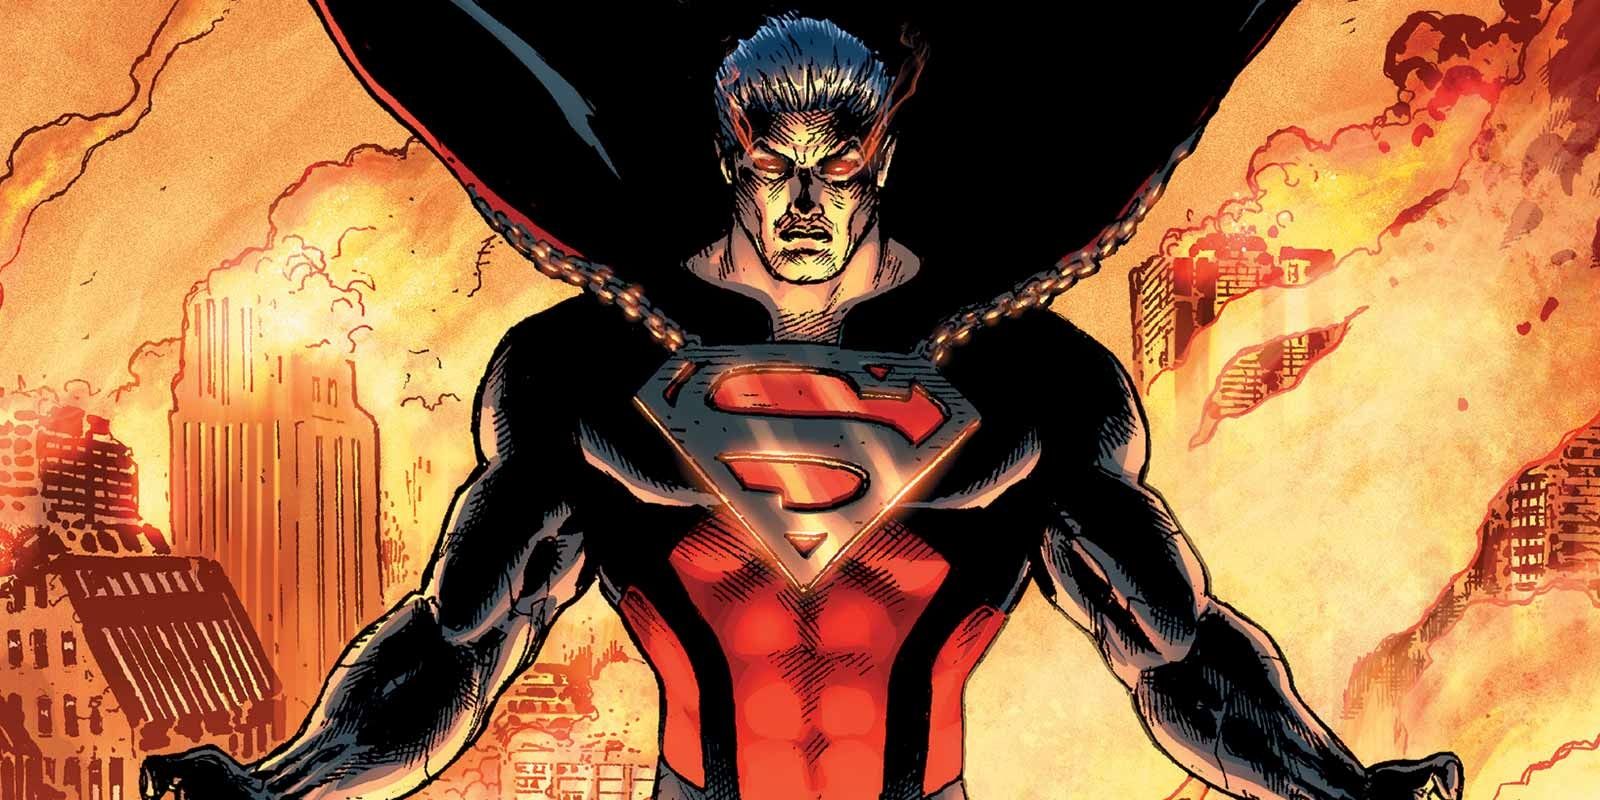 An evil clone of Superman named Brutaal with Earth 2 burning in the background